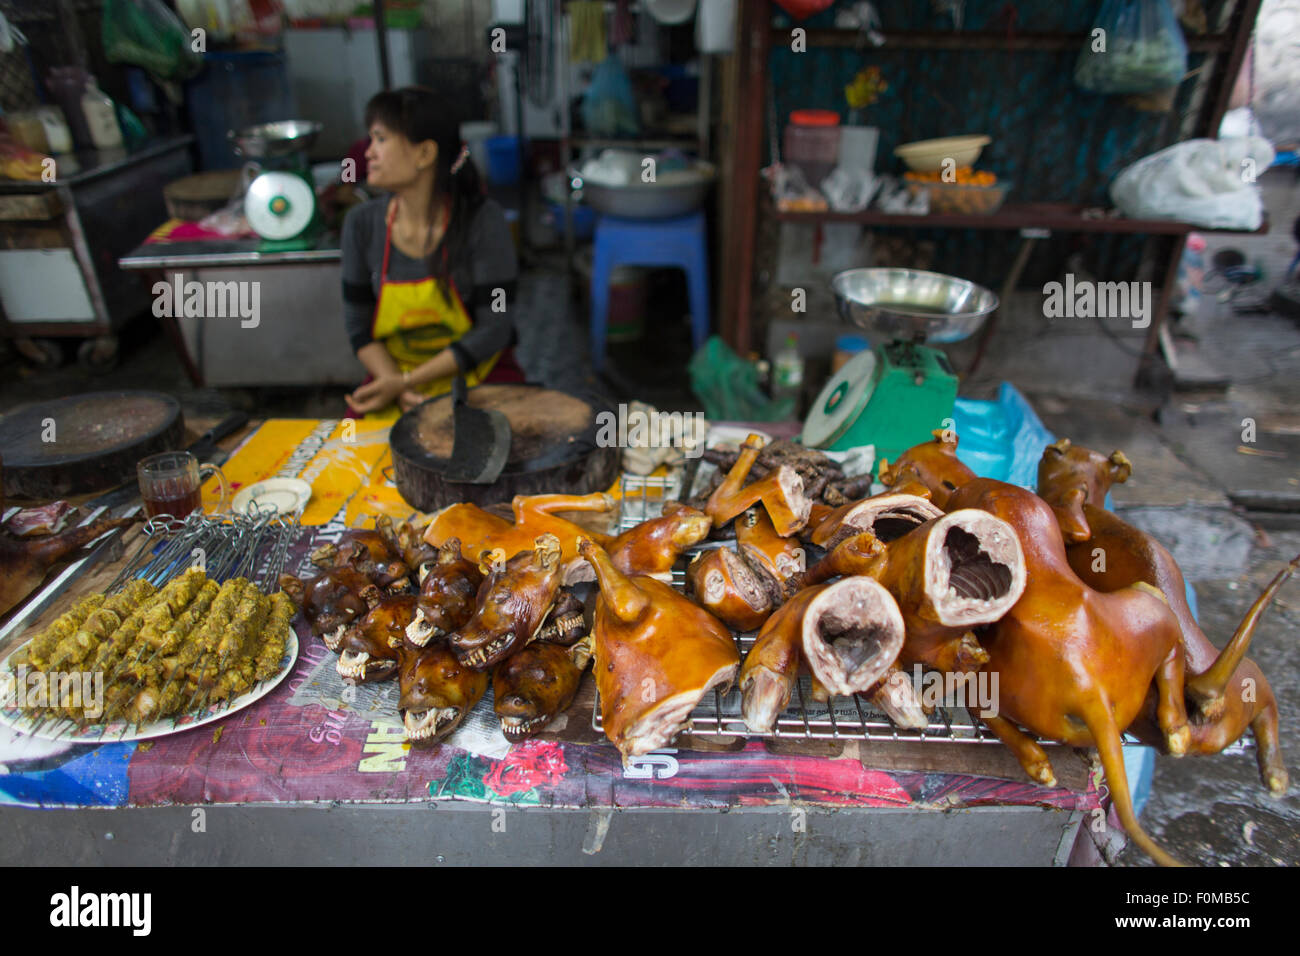 Dog is a delicacy in Vietnam Stock Photo